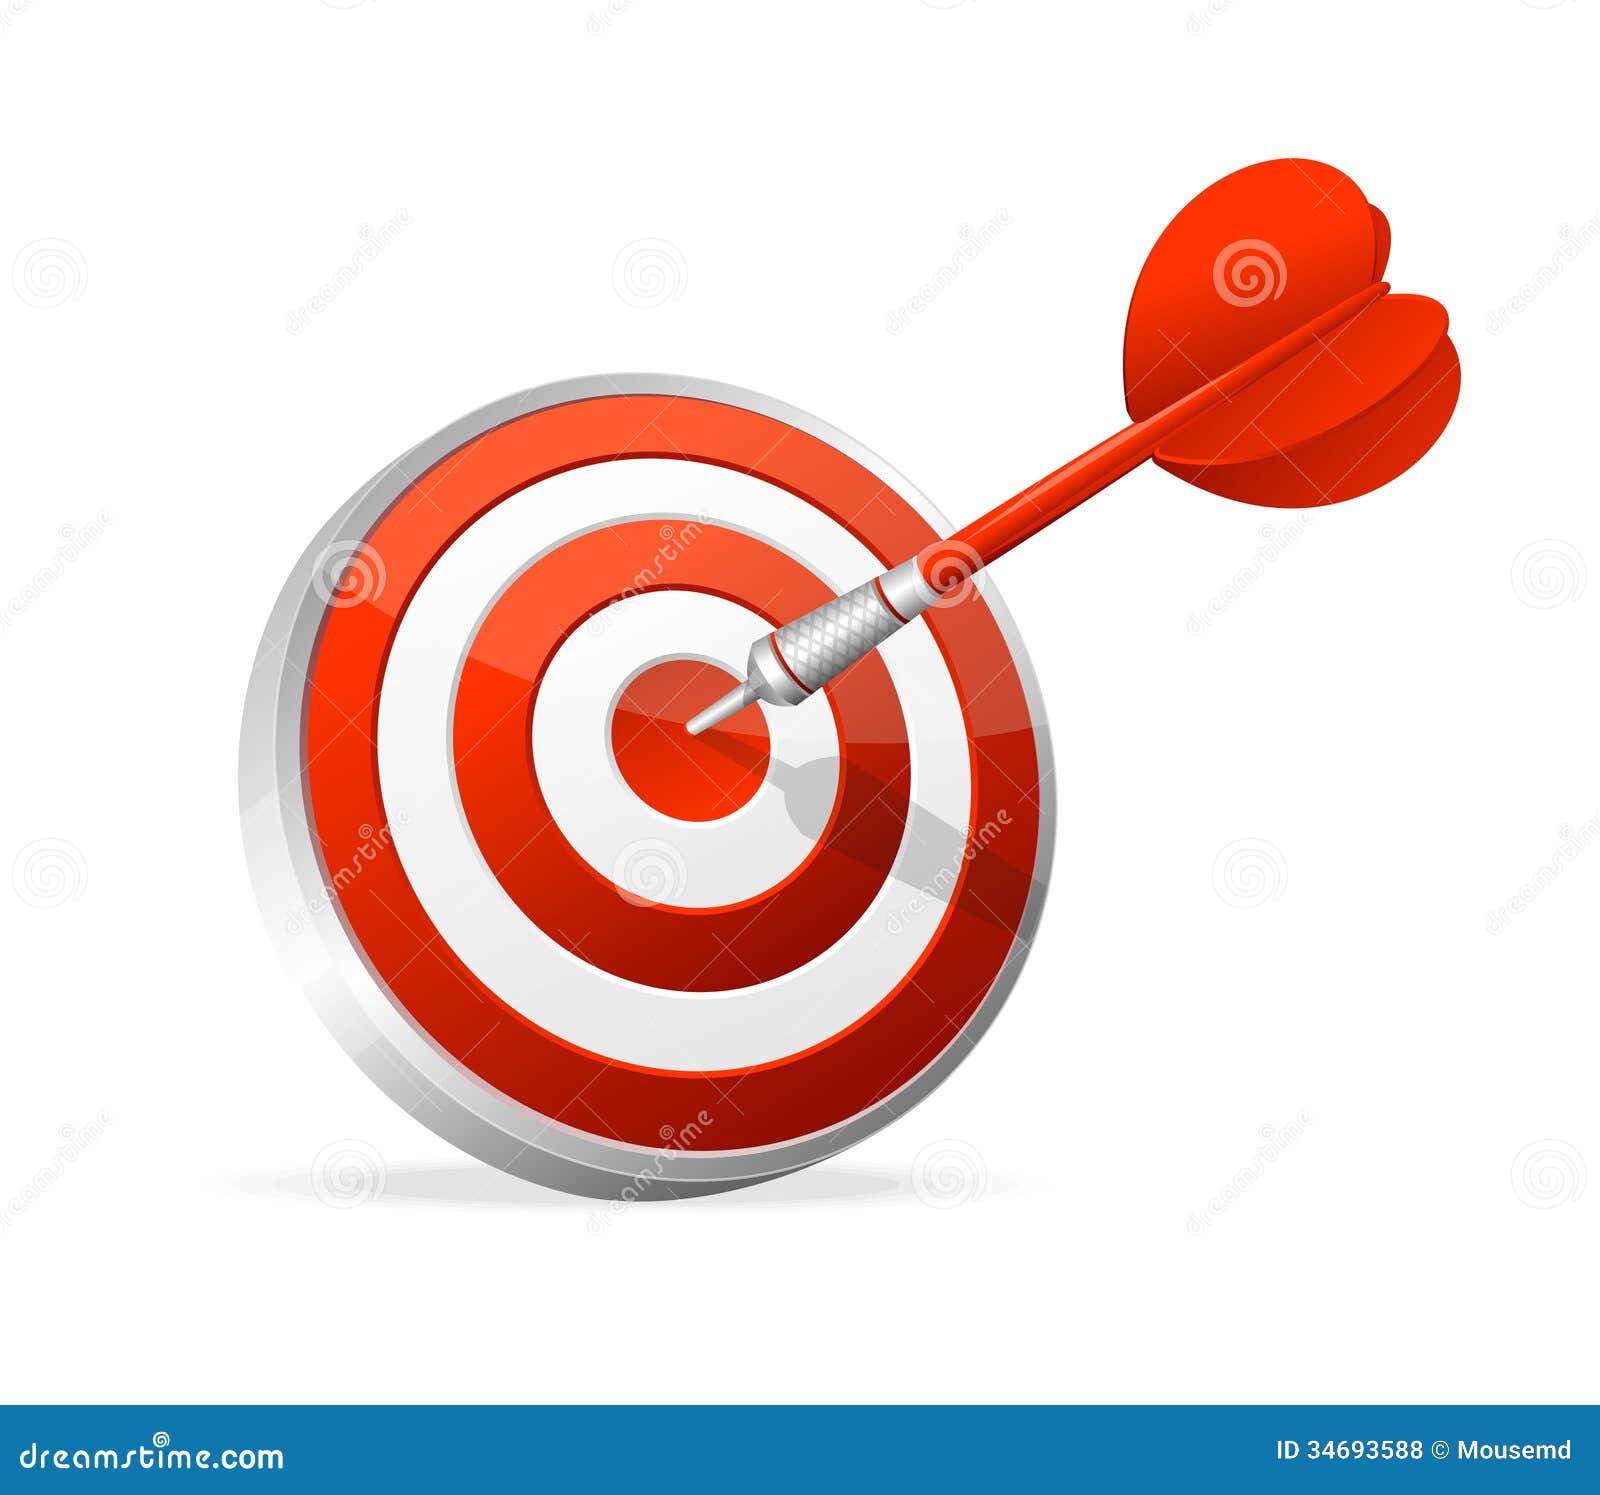 animated target clipart - photo #23